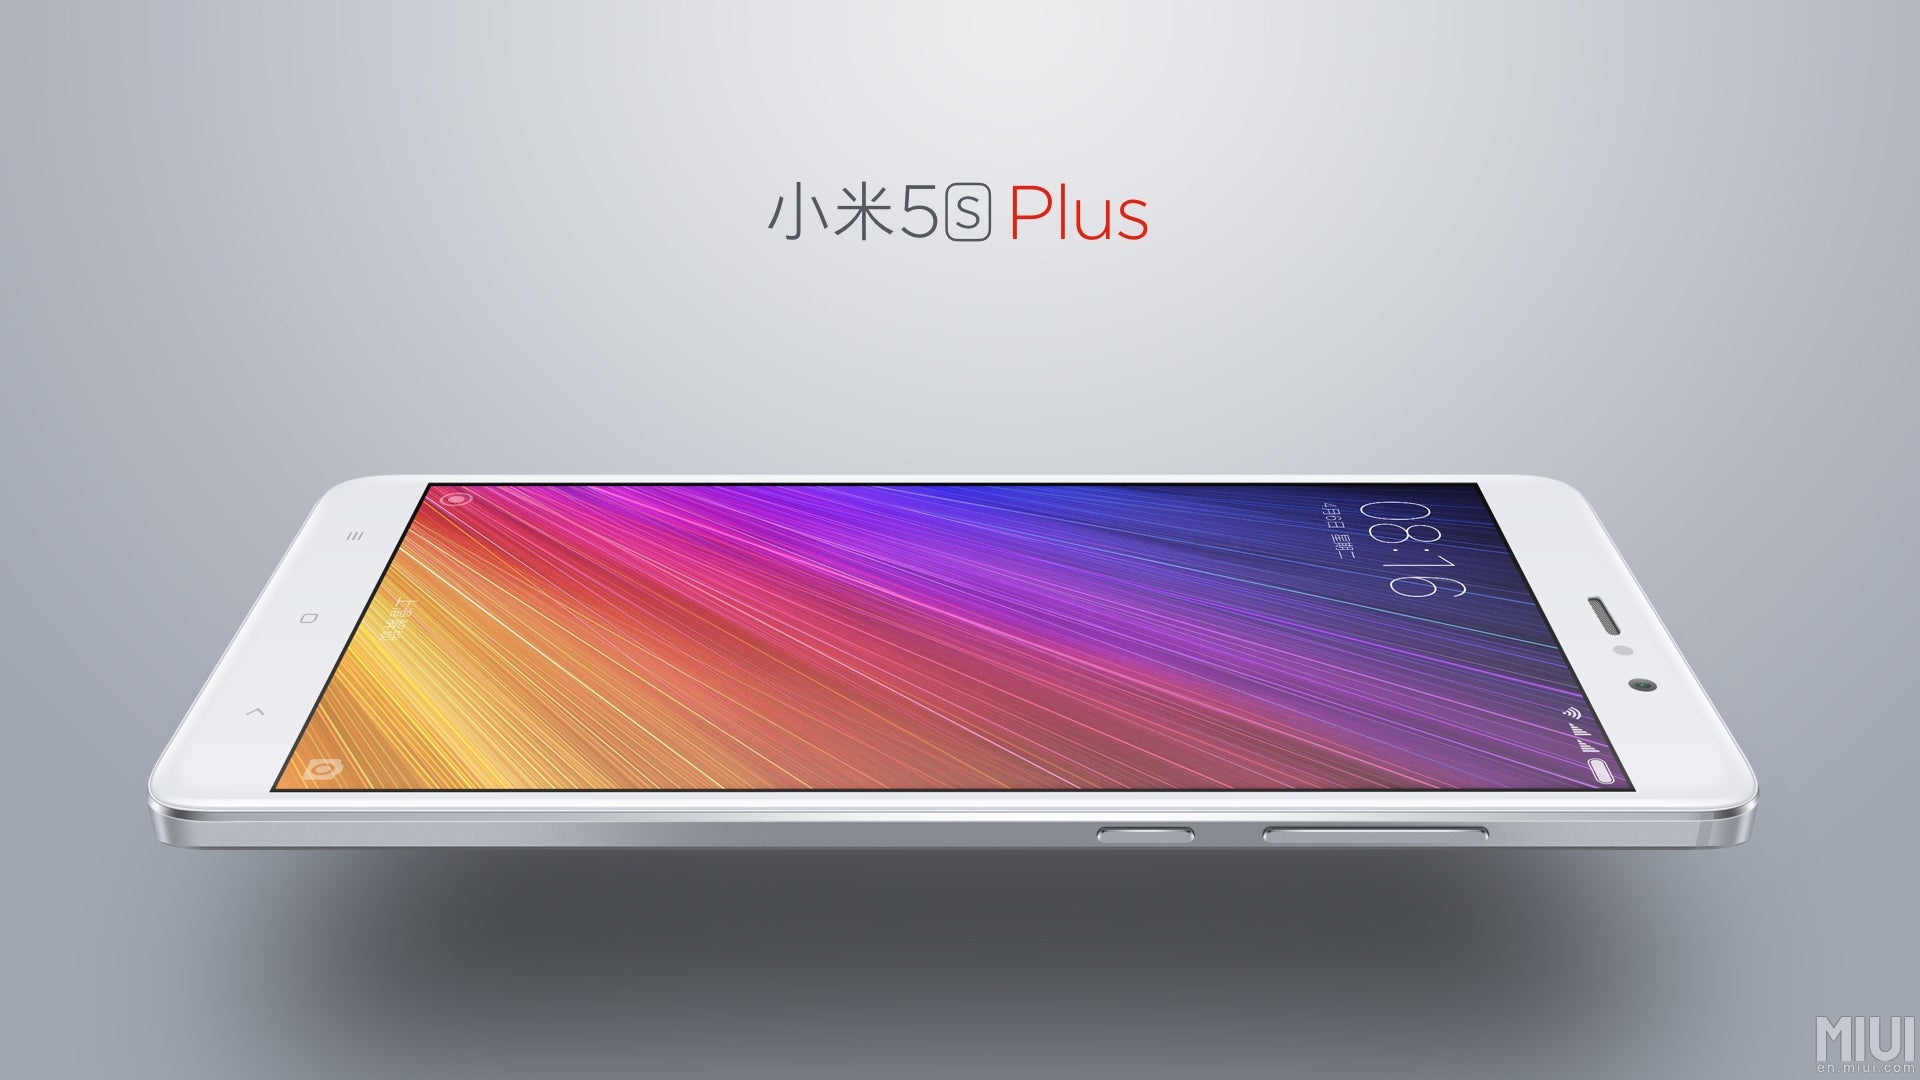 The Xiaomi Mi 5s Plus is the larger of the two new models with 5.7-inch, pressure-sensitive display - Xiaomi Mi 5s and 5s Plus generate 3 million registrations in 24 hours